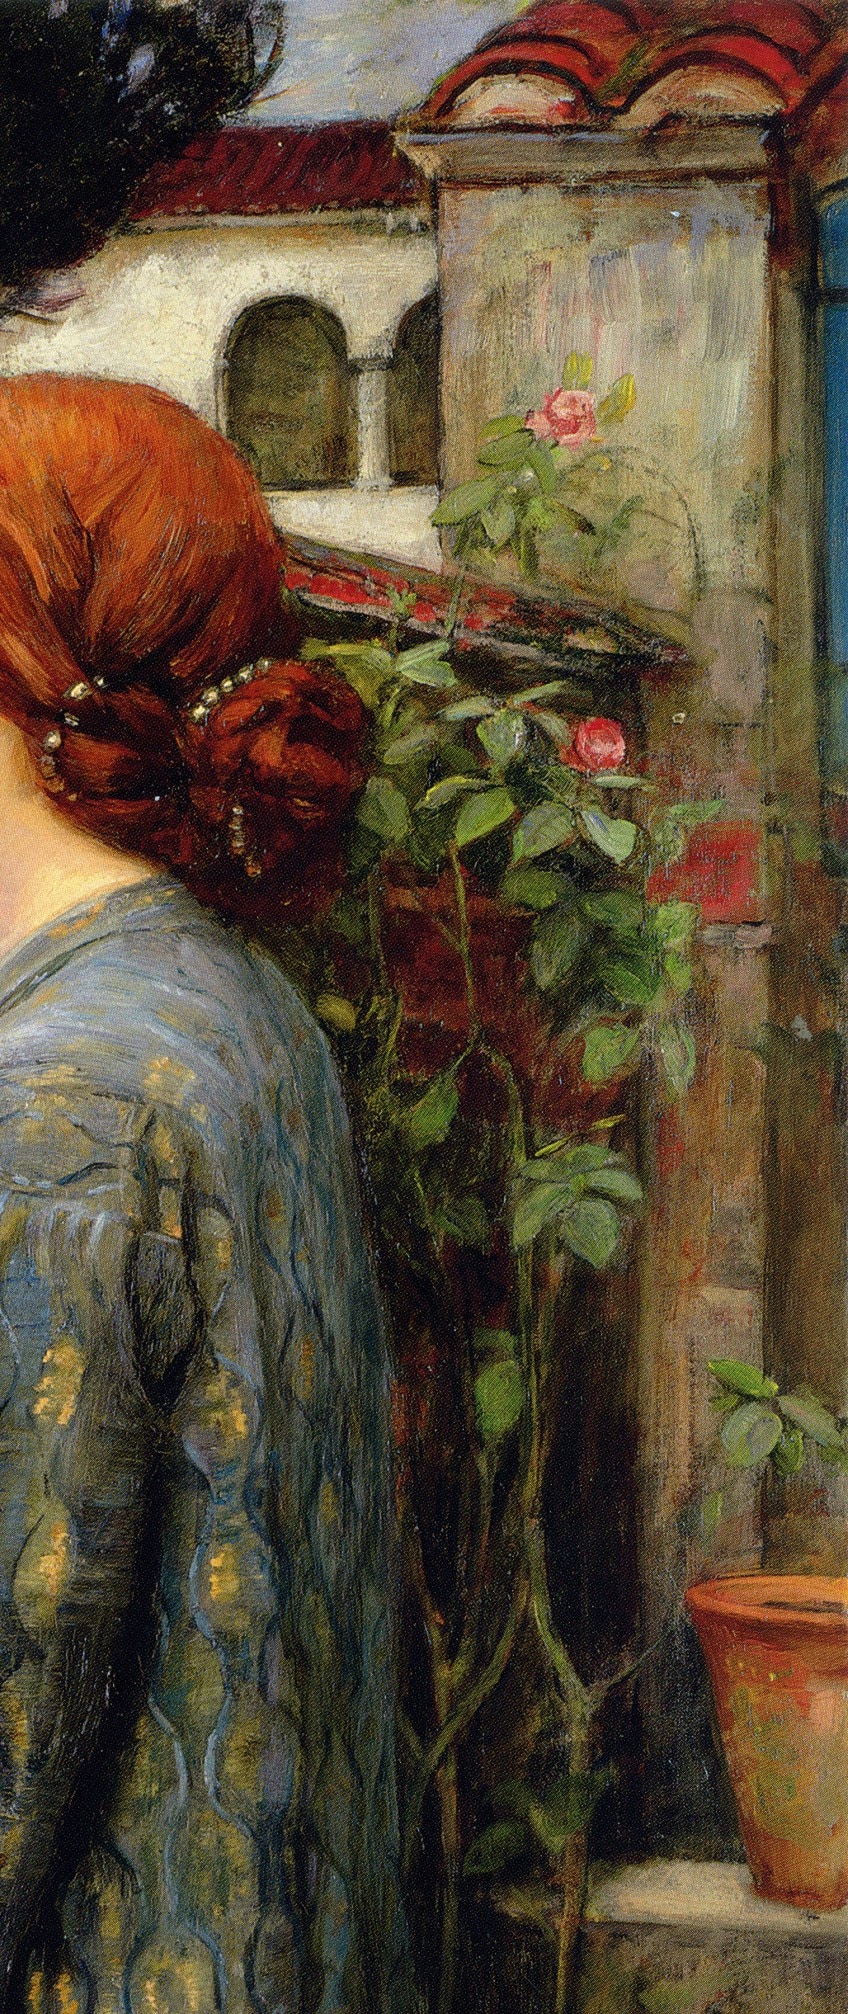 Detail of The Soul of the Rose by John William Waterhouse